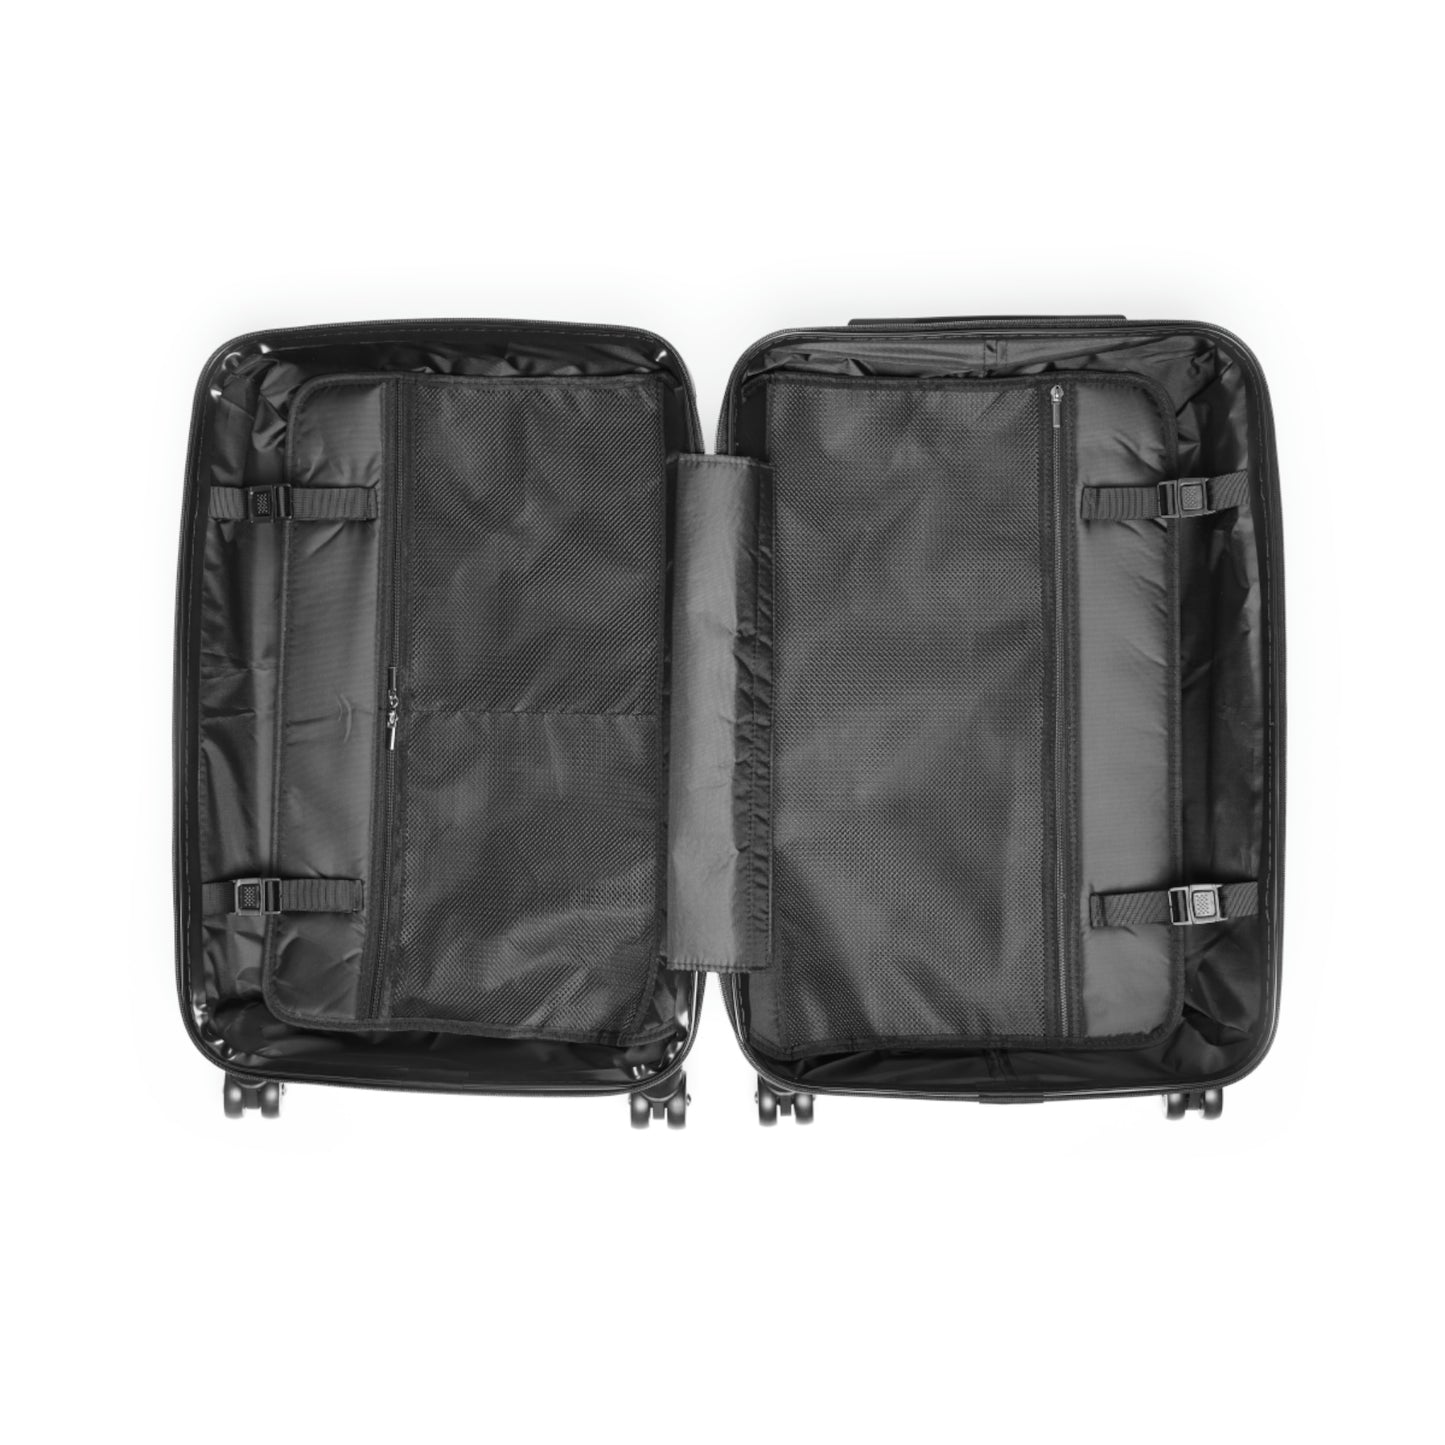 Hard Shell Suitcases - World Map